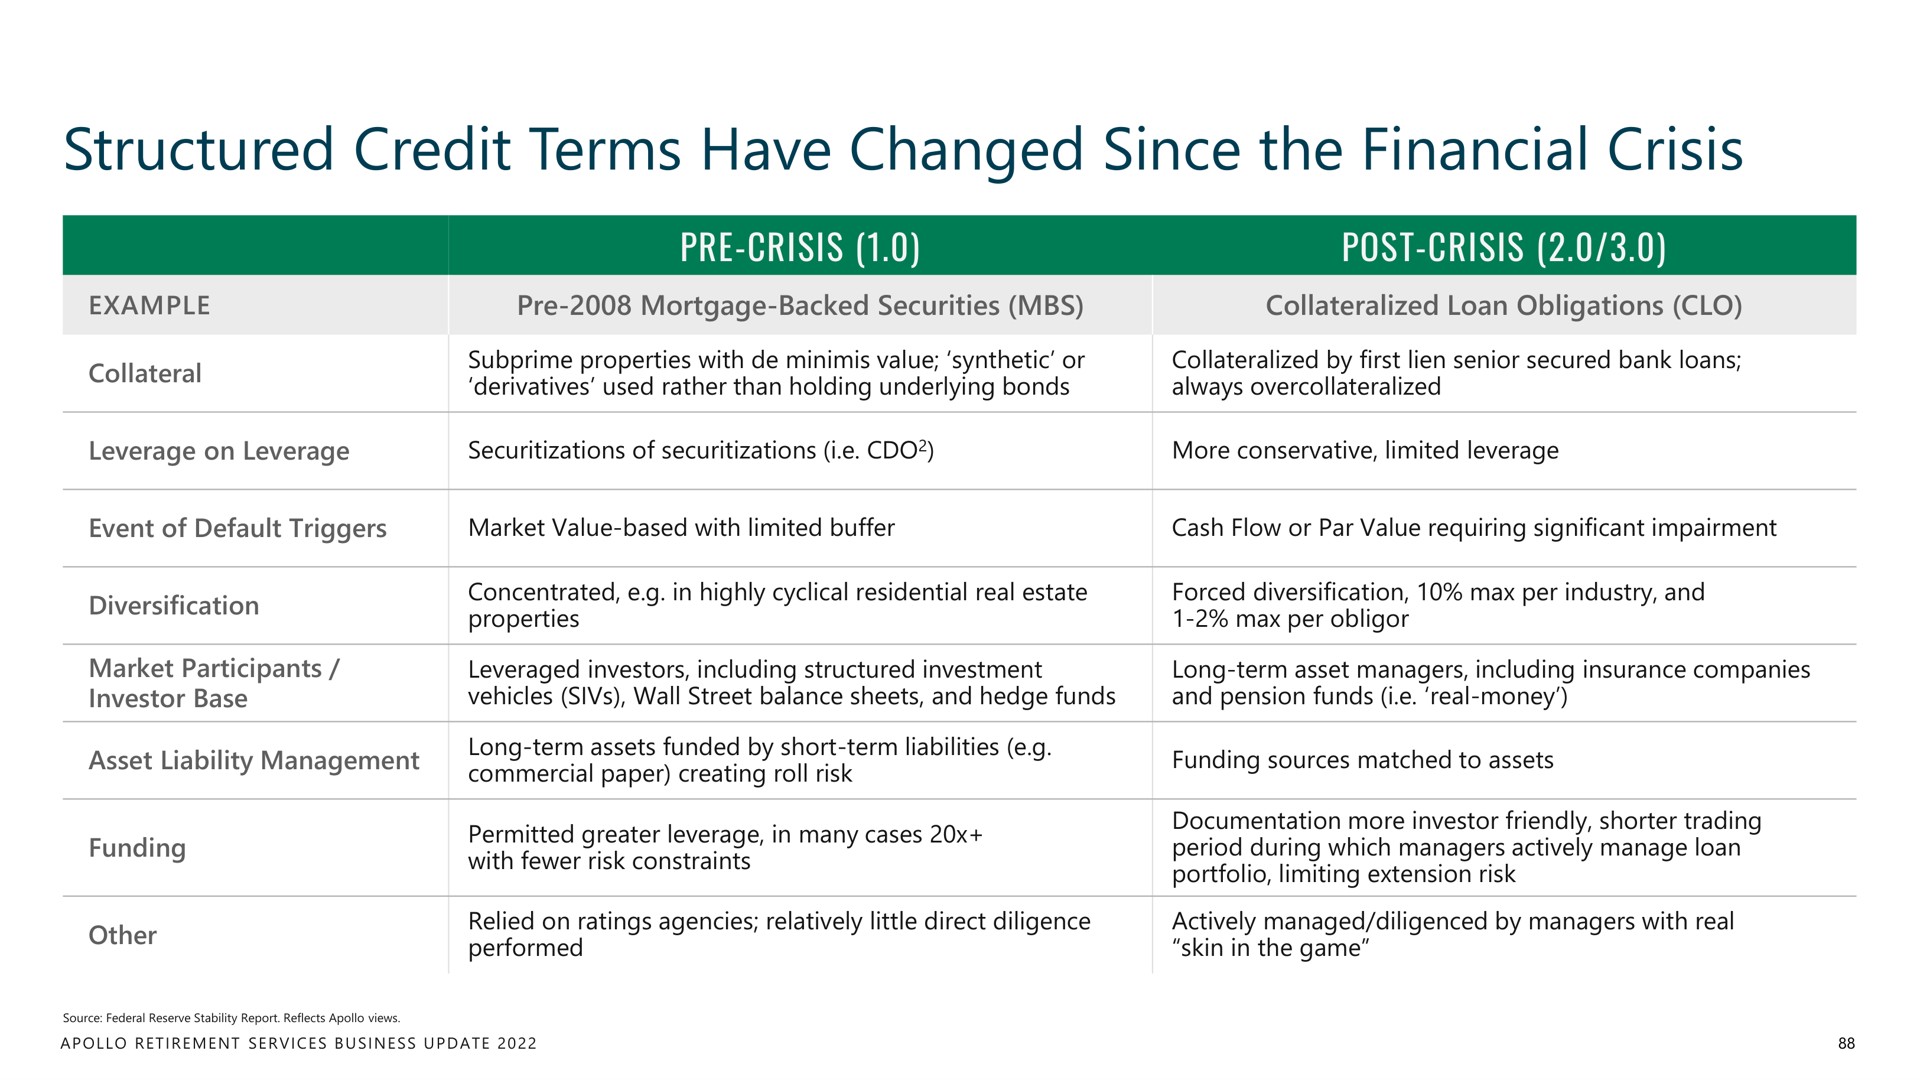 structured credit terms have changed since the financial crisis | Apollo Global Management